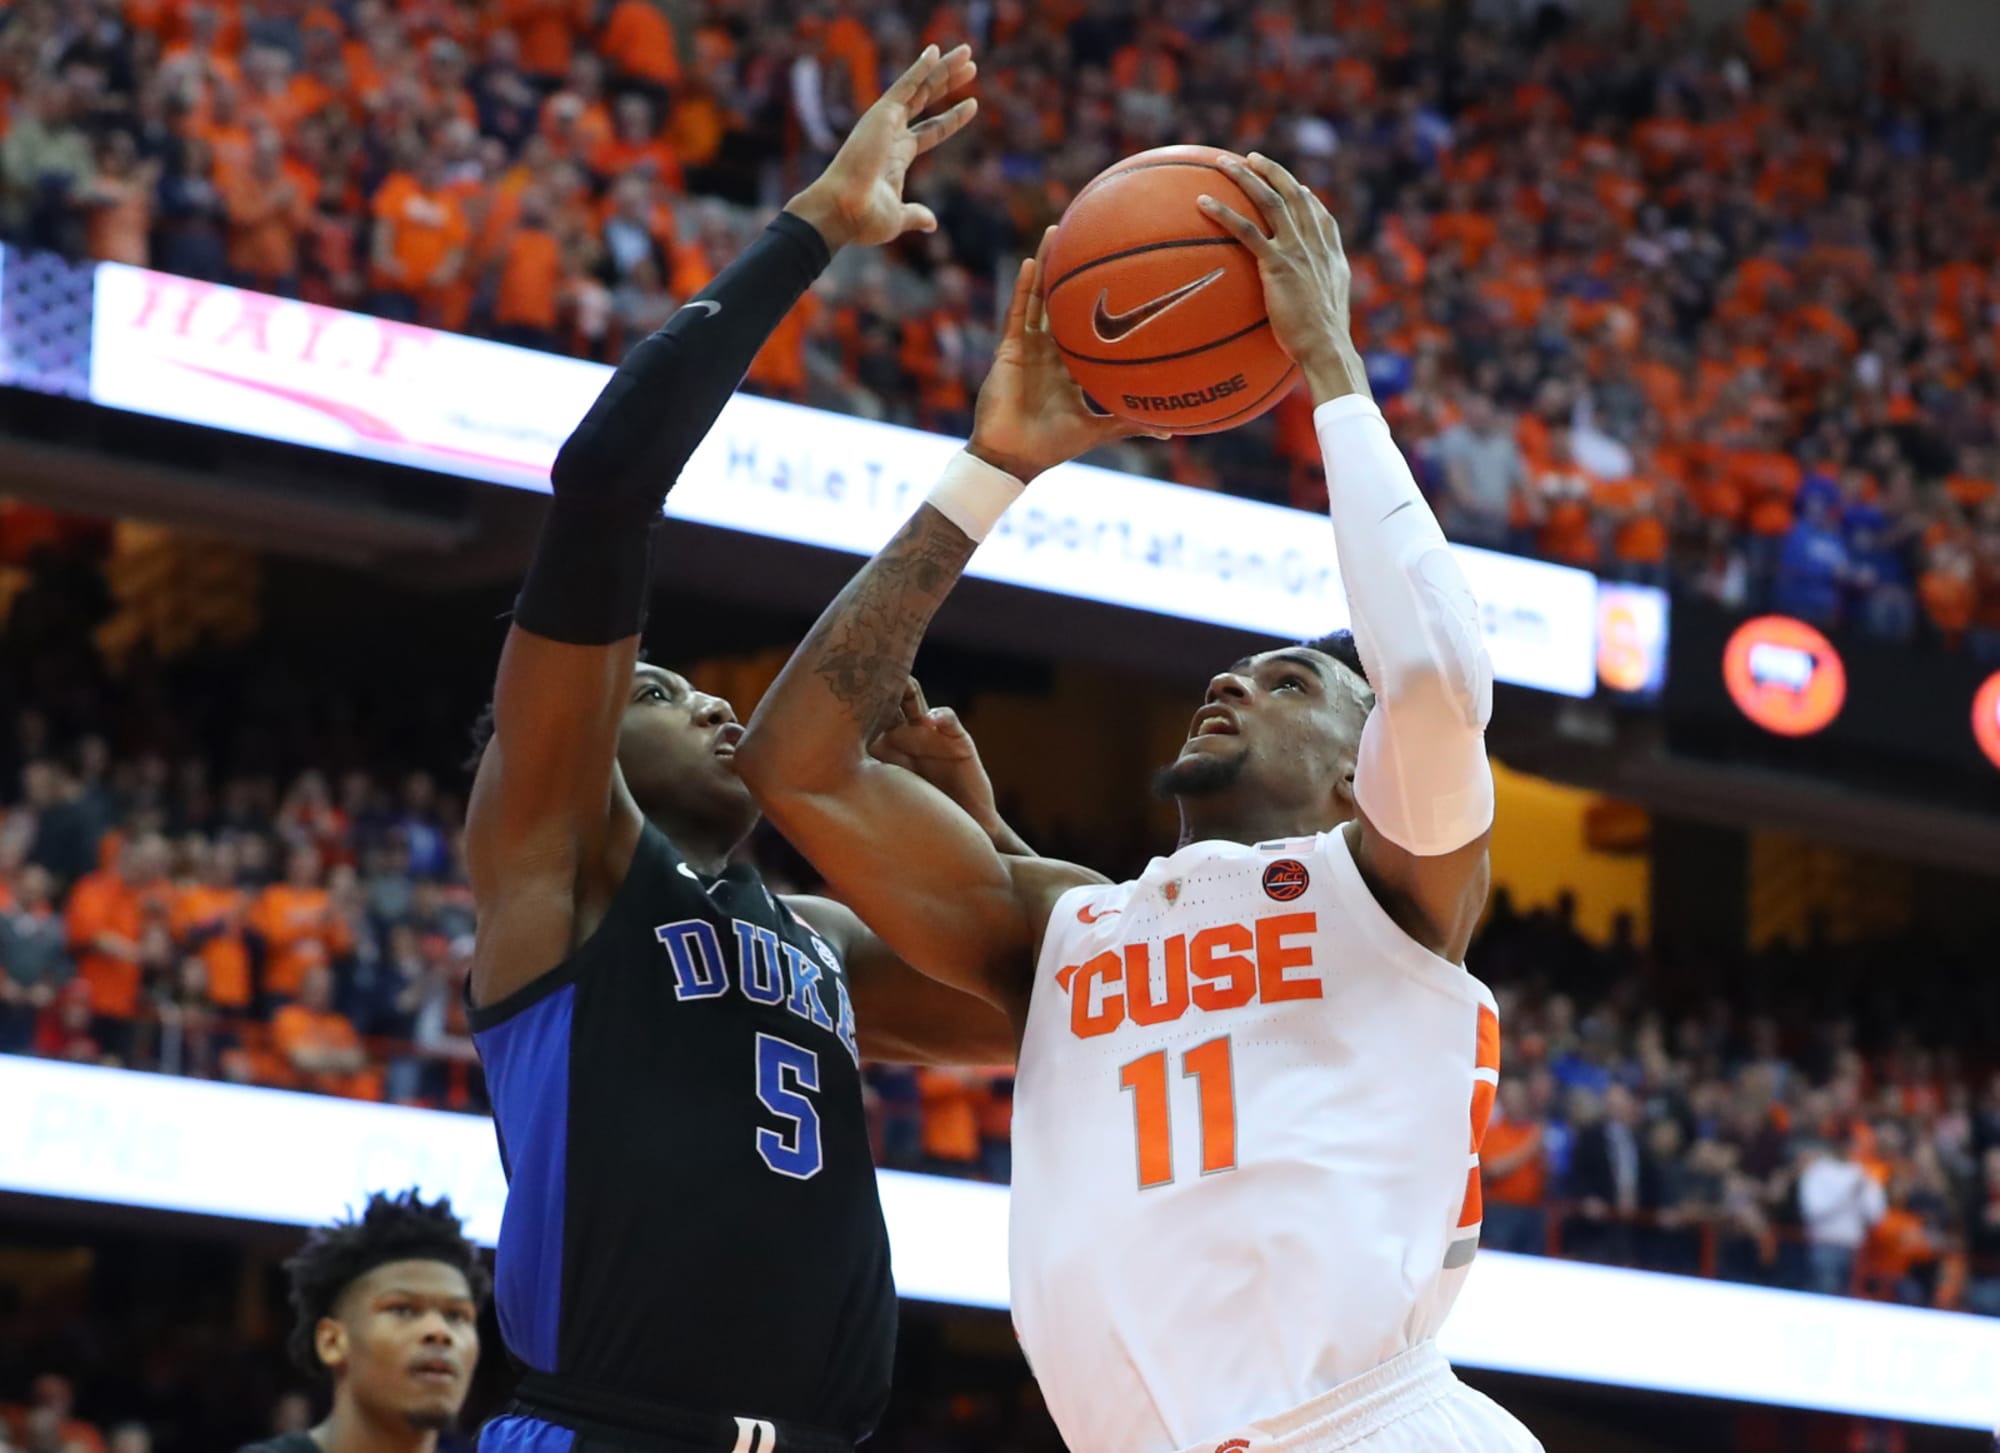 Syracuse Basketball vs Duke (ACC Tournament) How to Watch and Listen